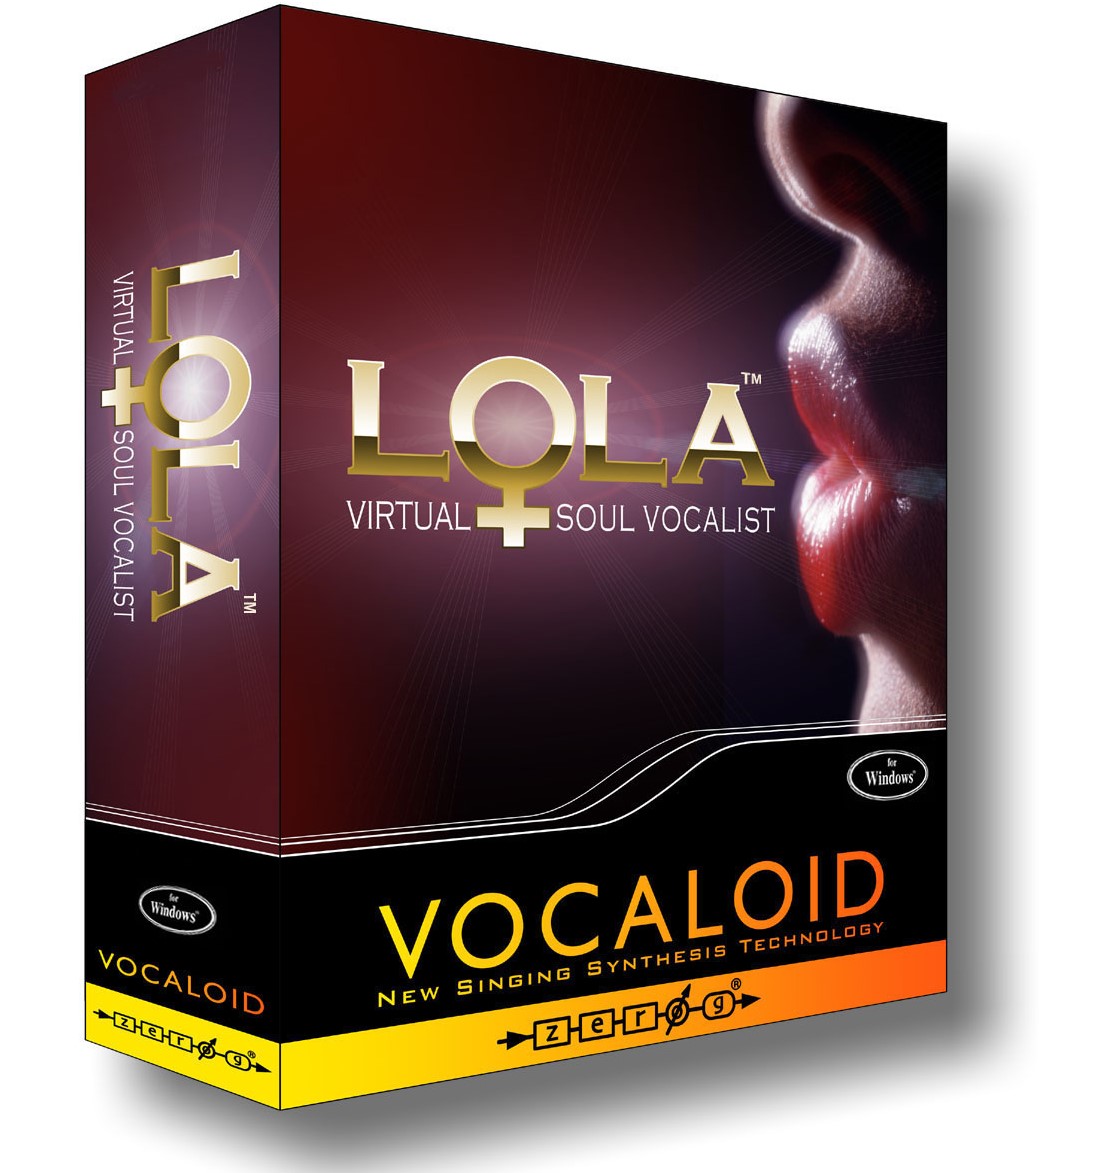 cannot launch vocaloid 3 editor. no singer library